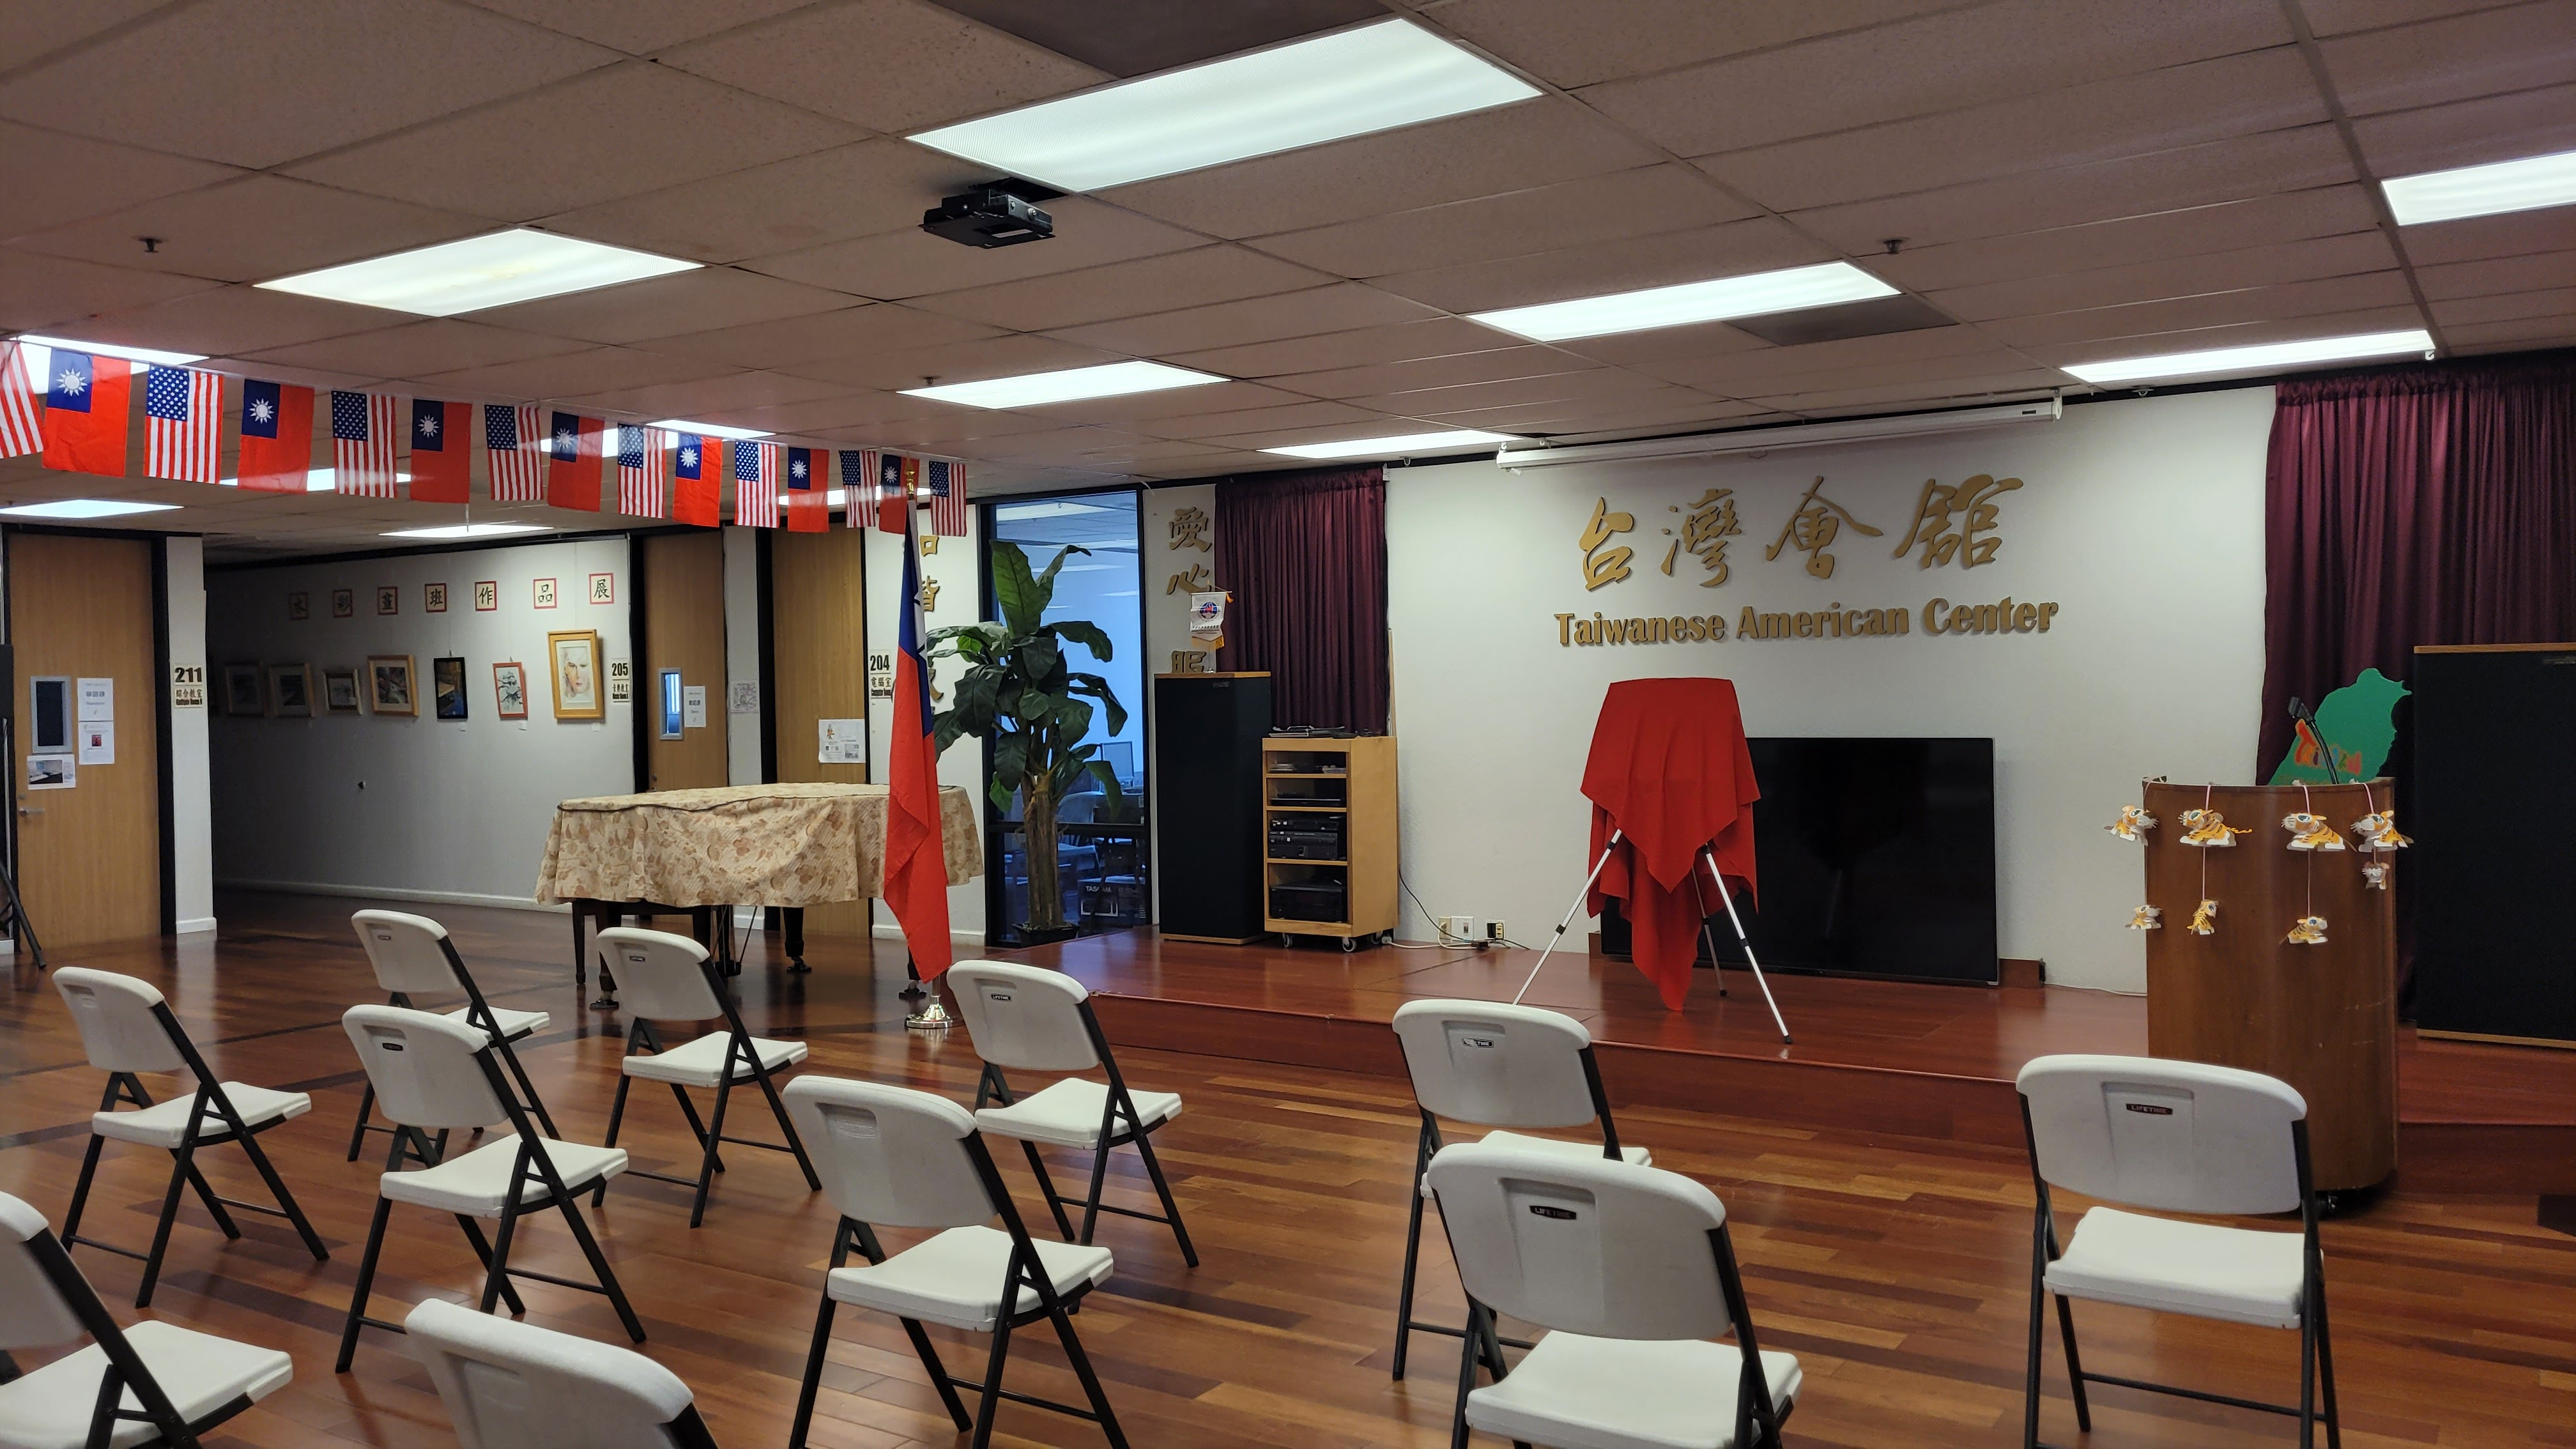 Classroom environment of the Taiwan Center for Mandarin Learning - Taiwanese American Center of Northern California. 教室環境